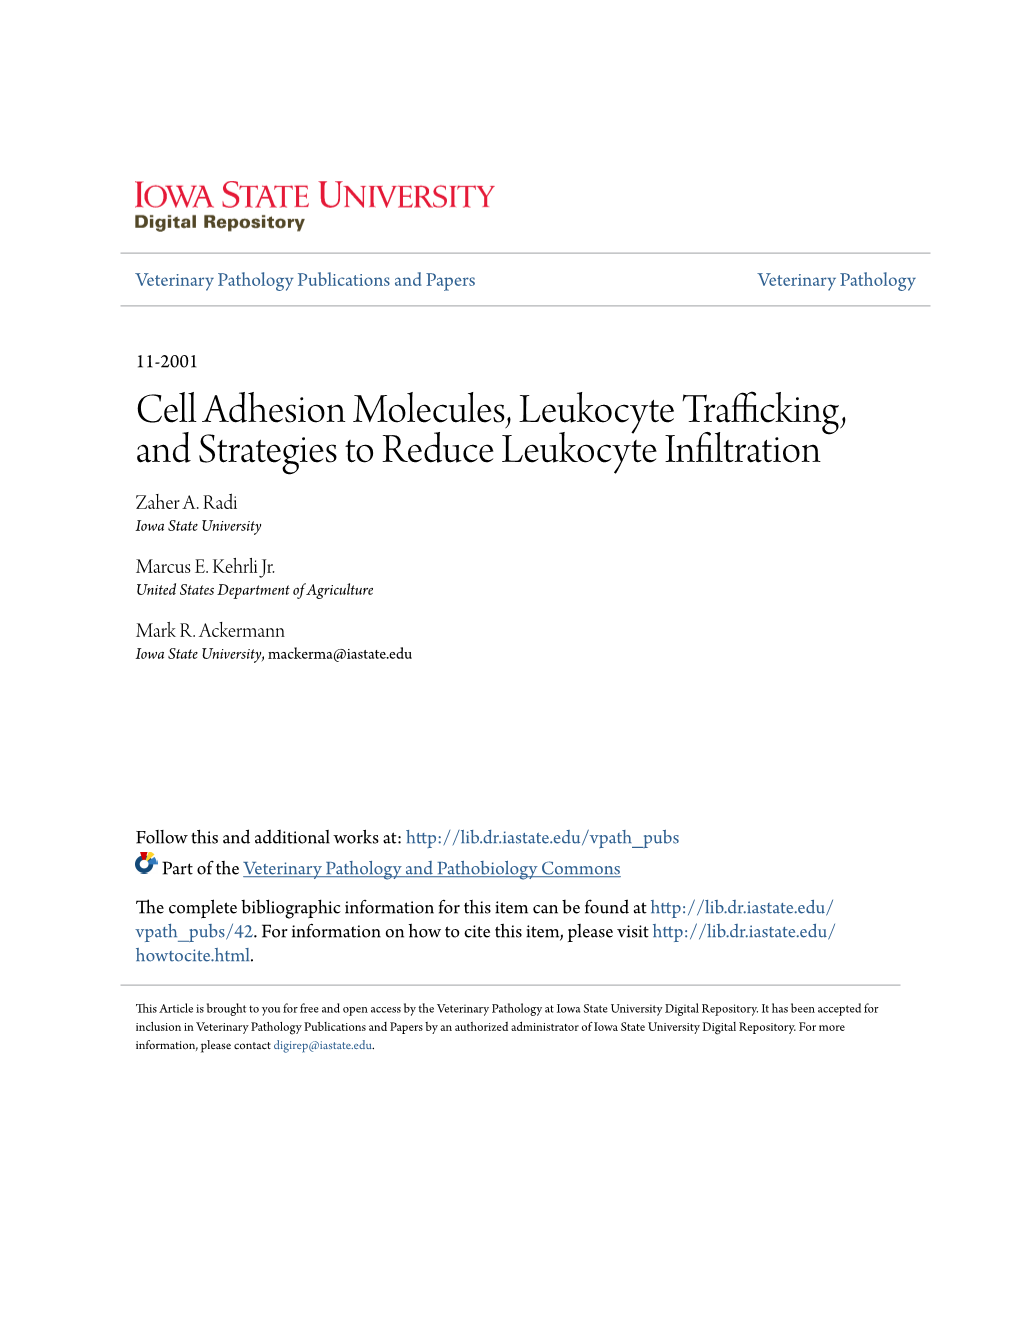 Cell Adhesion Molecules, Leukocyte Trafficking, and Strategies to Reduce Leukocyte Infiltration Zaher A